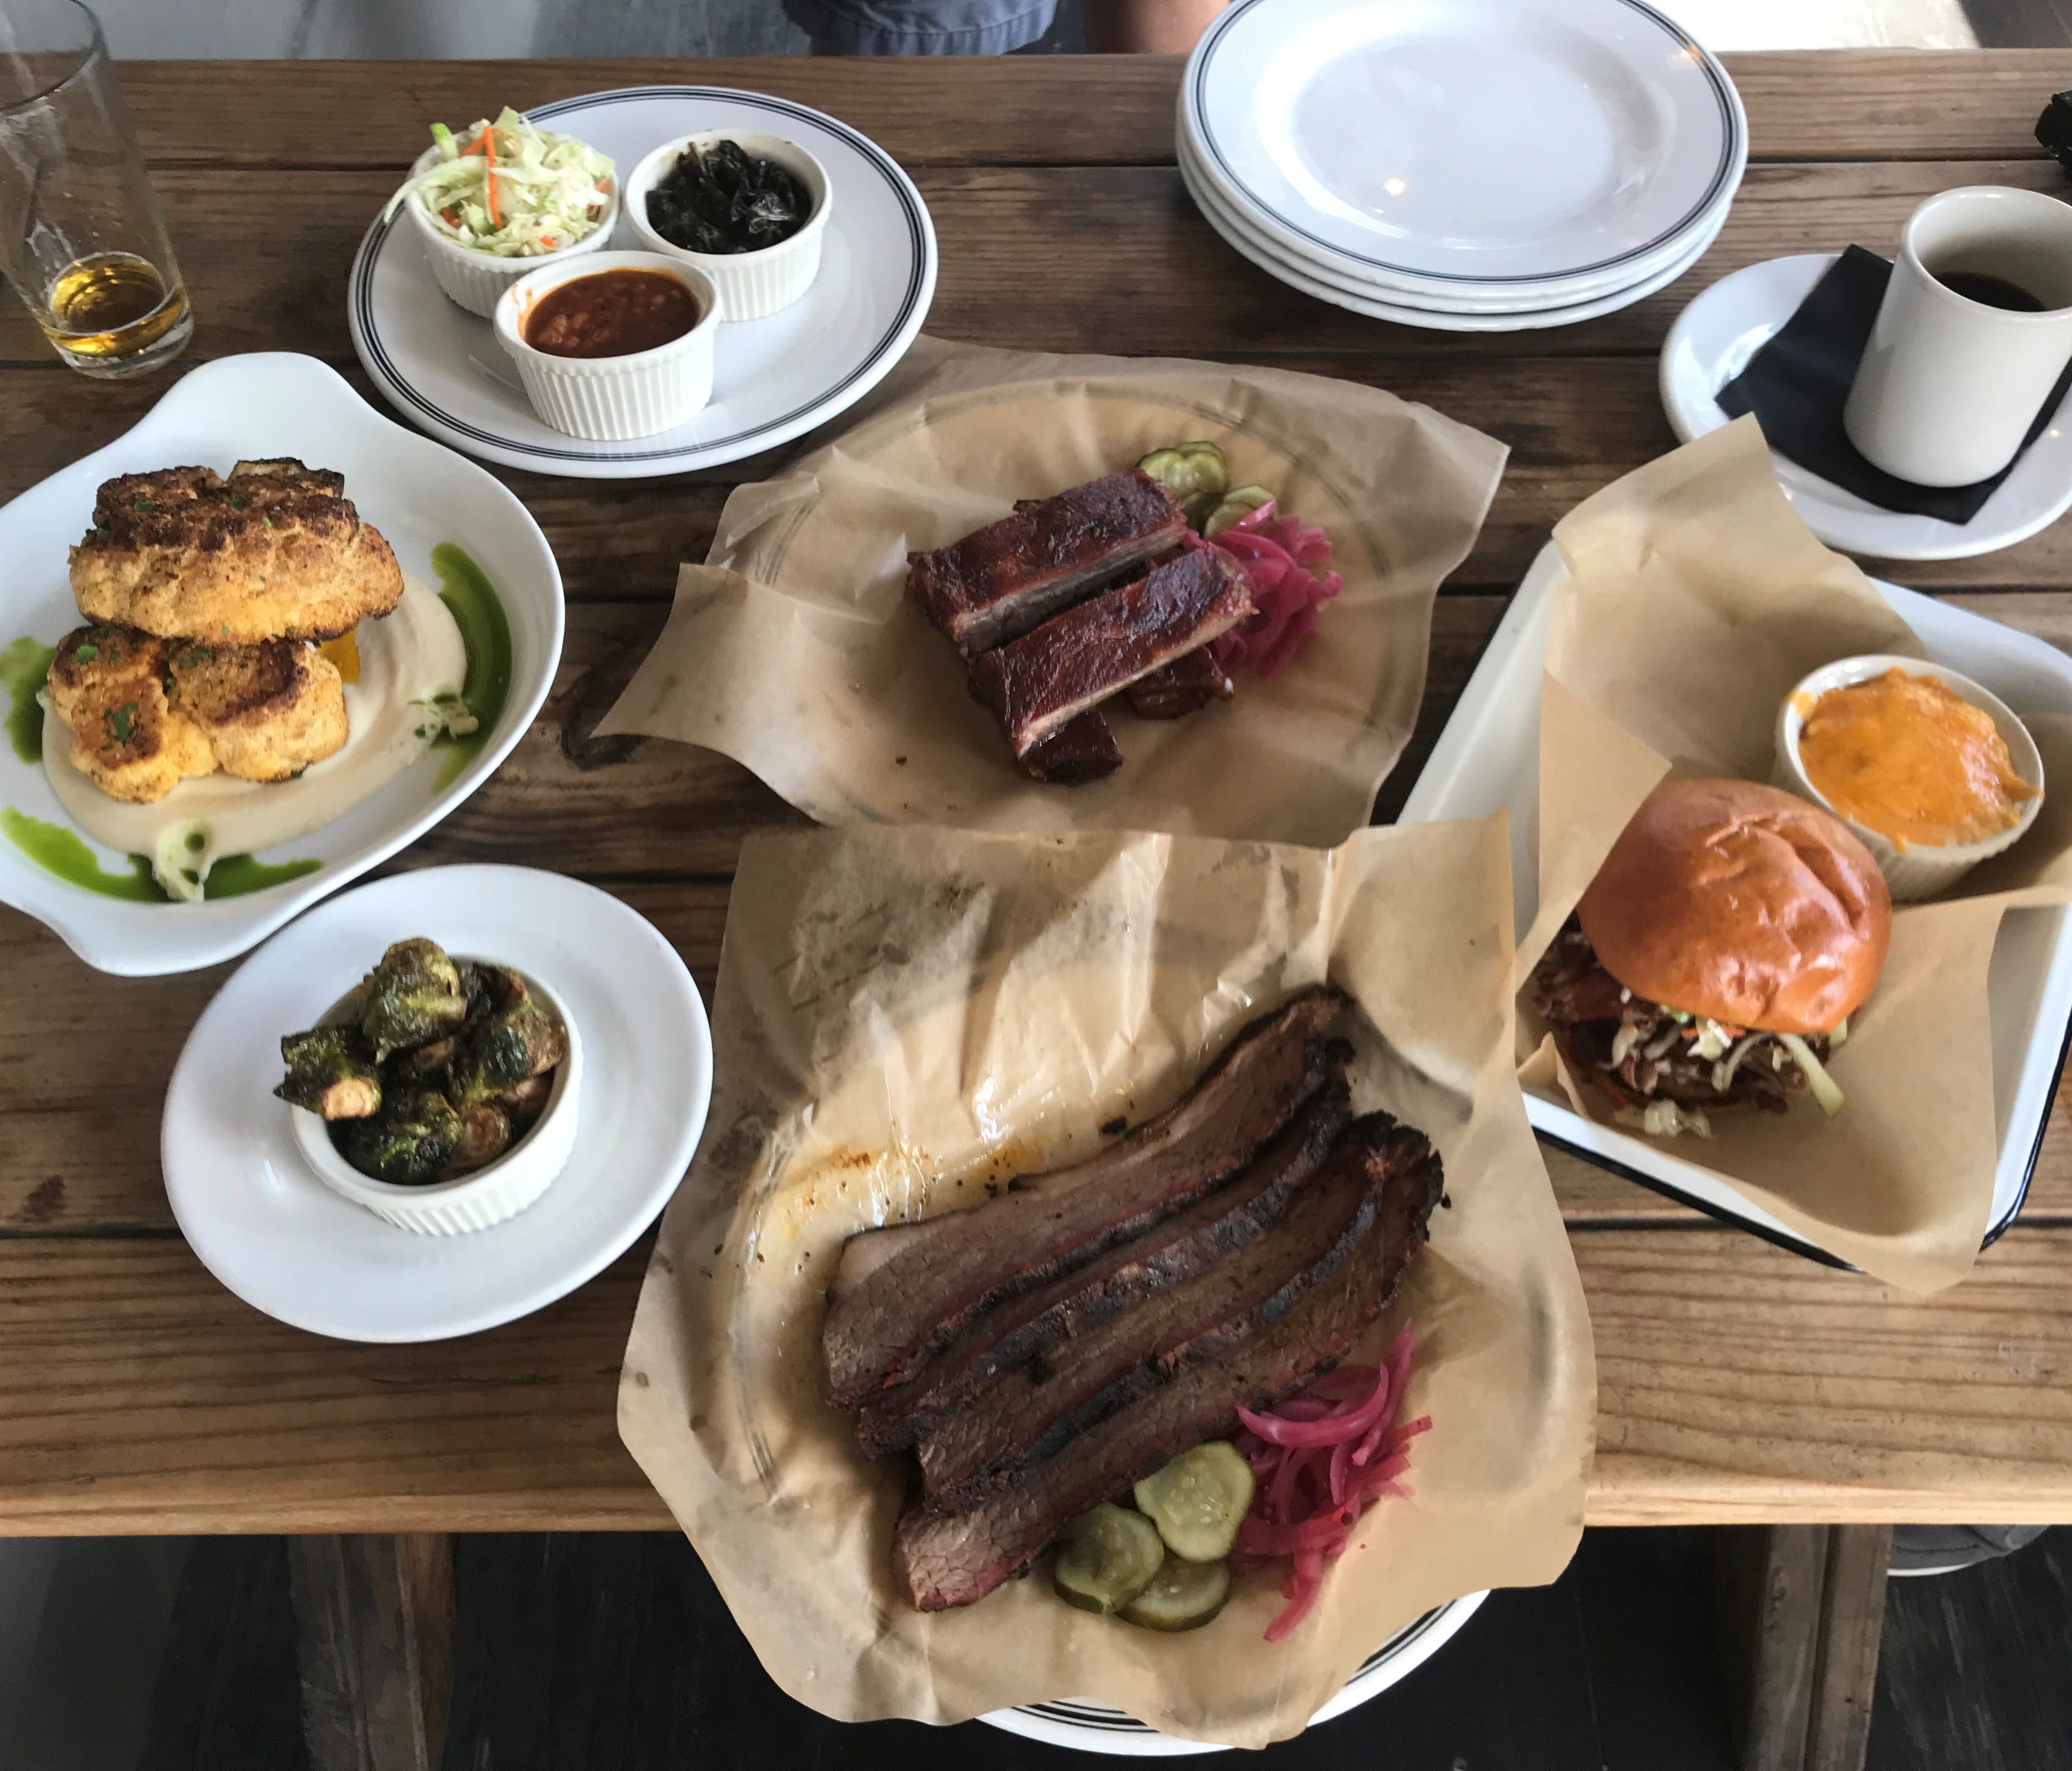 One of the toughest things about eating here is picking what to order, as this is a far cry from the usual selection of two to four meats and a couple of sides like cole slaw that define many Southern barbecue menus.